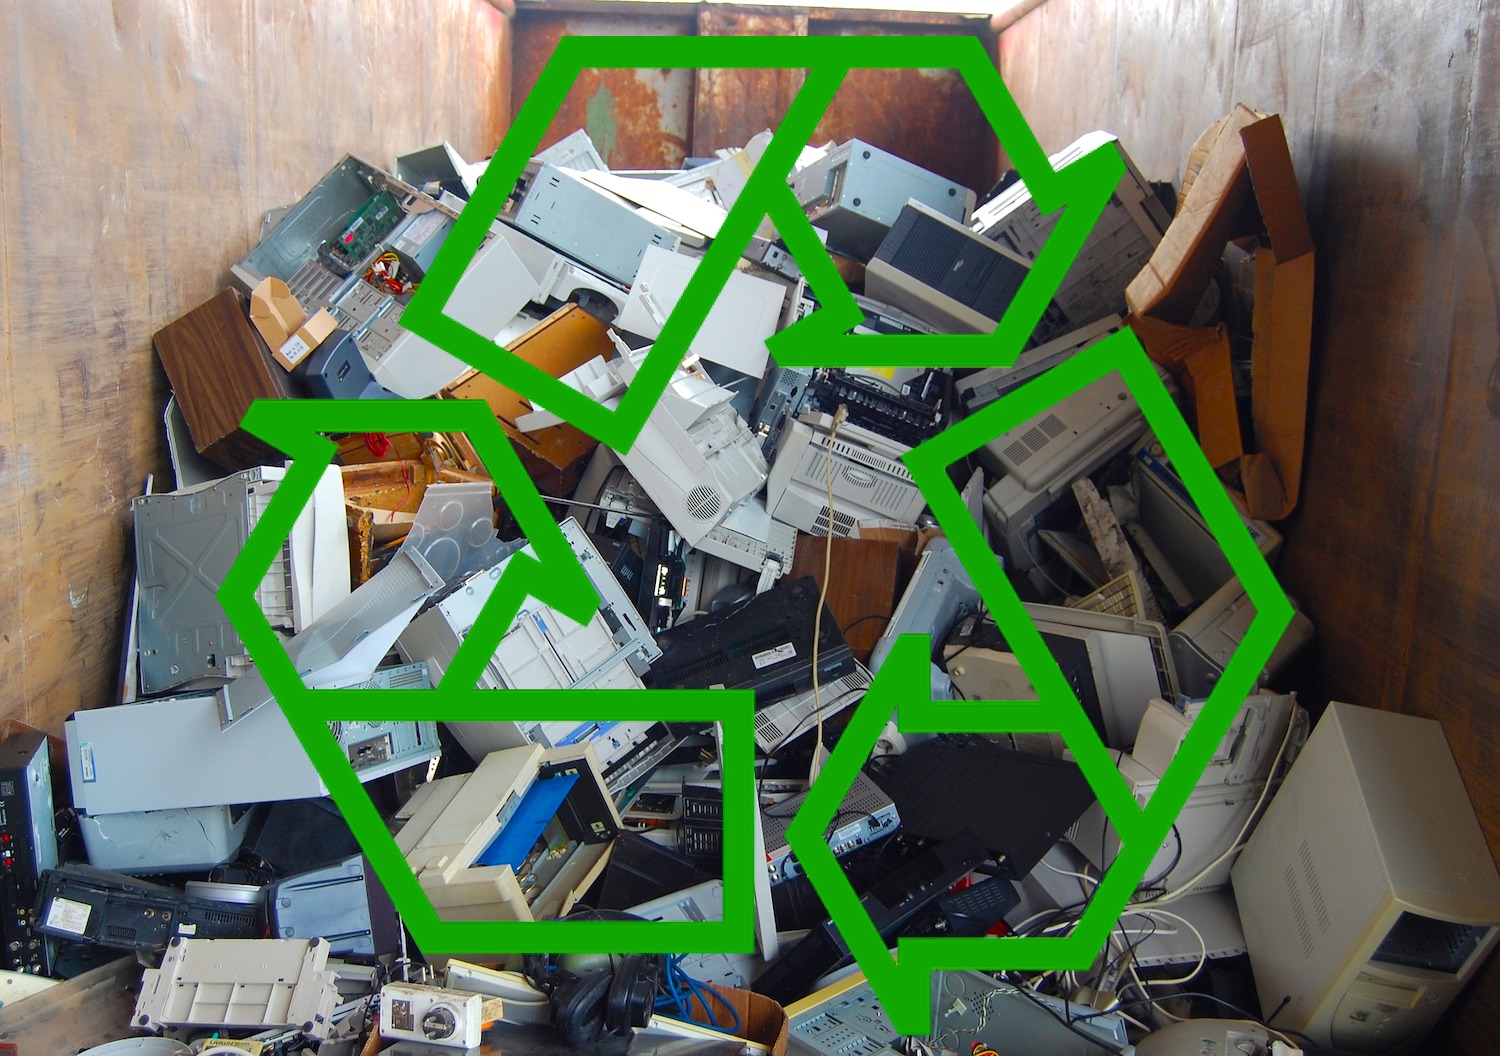 e-waste recycling efforts are one method of achieving a greener electronics industry